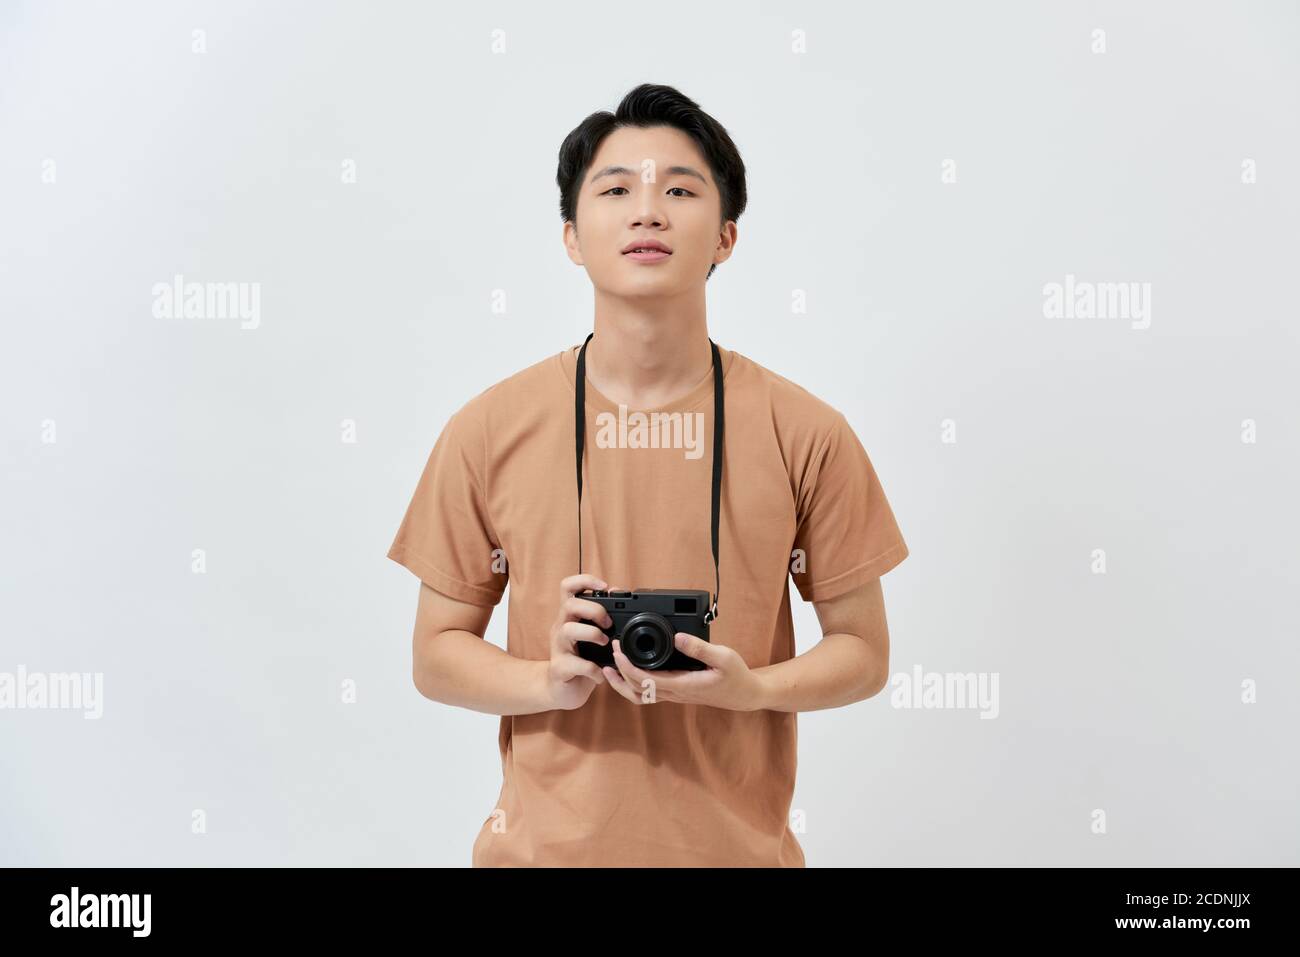 Amazing guy with photo digicam in hands wear casual t-shirt isolated on white background. Stock Photo